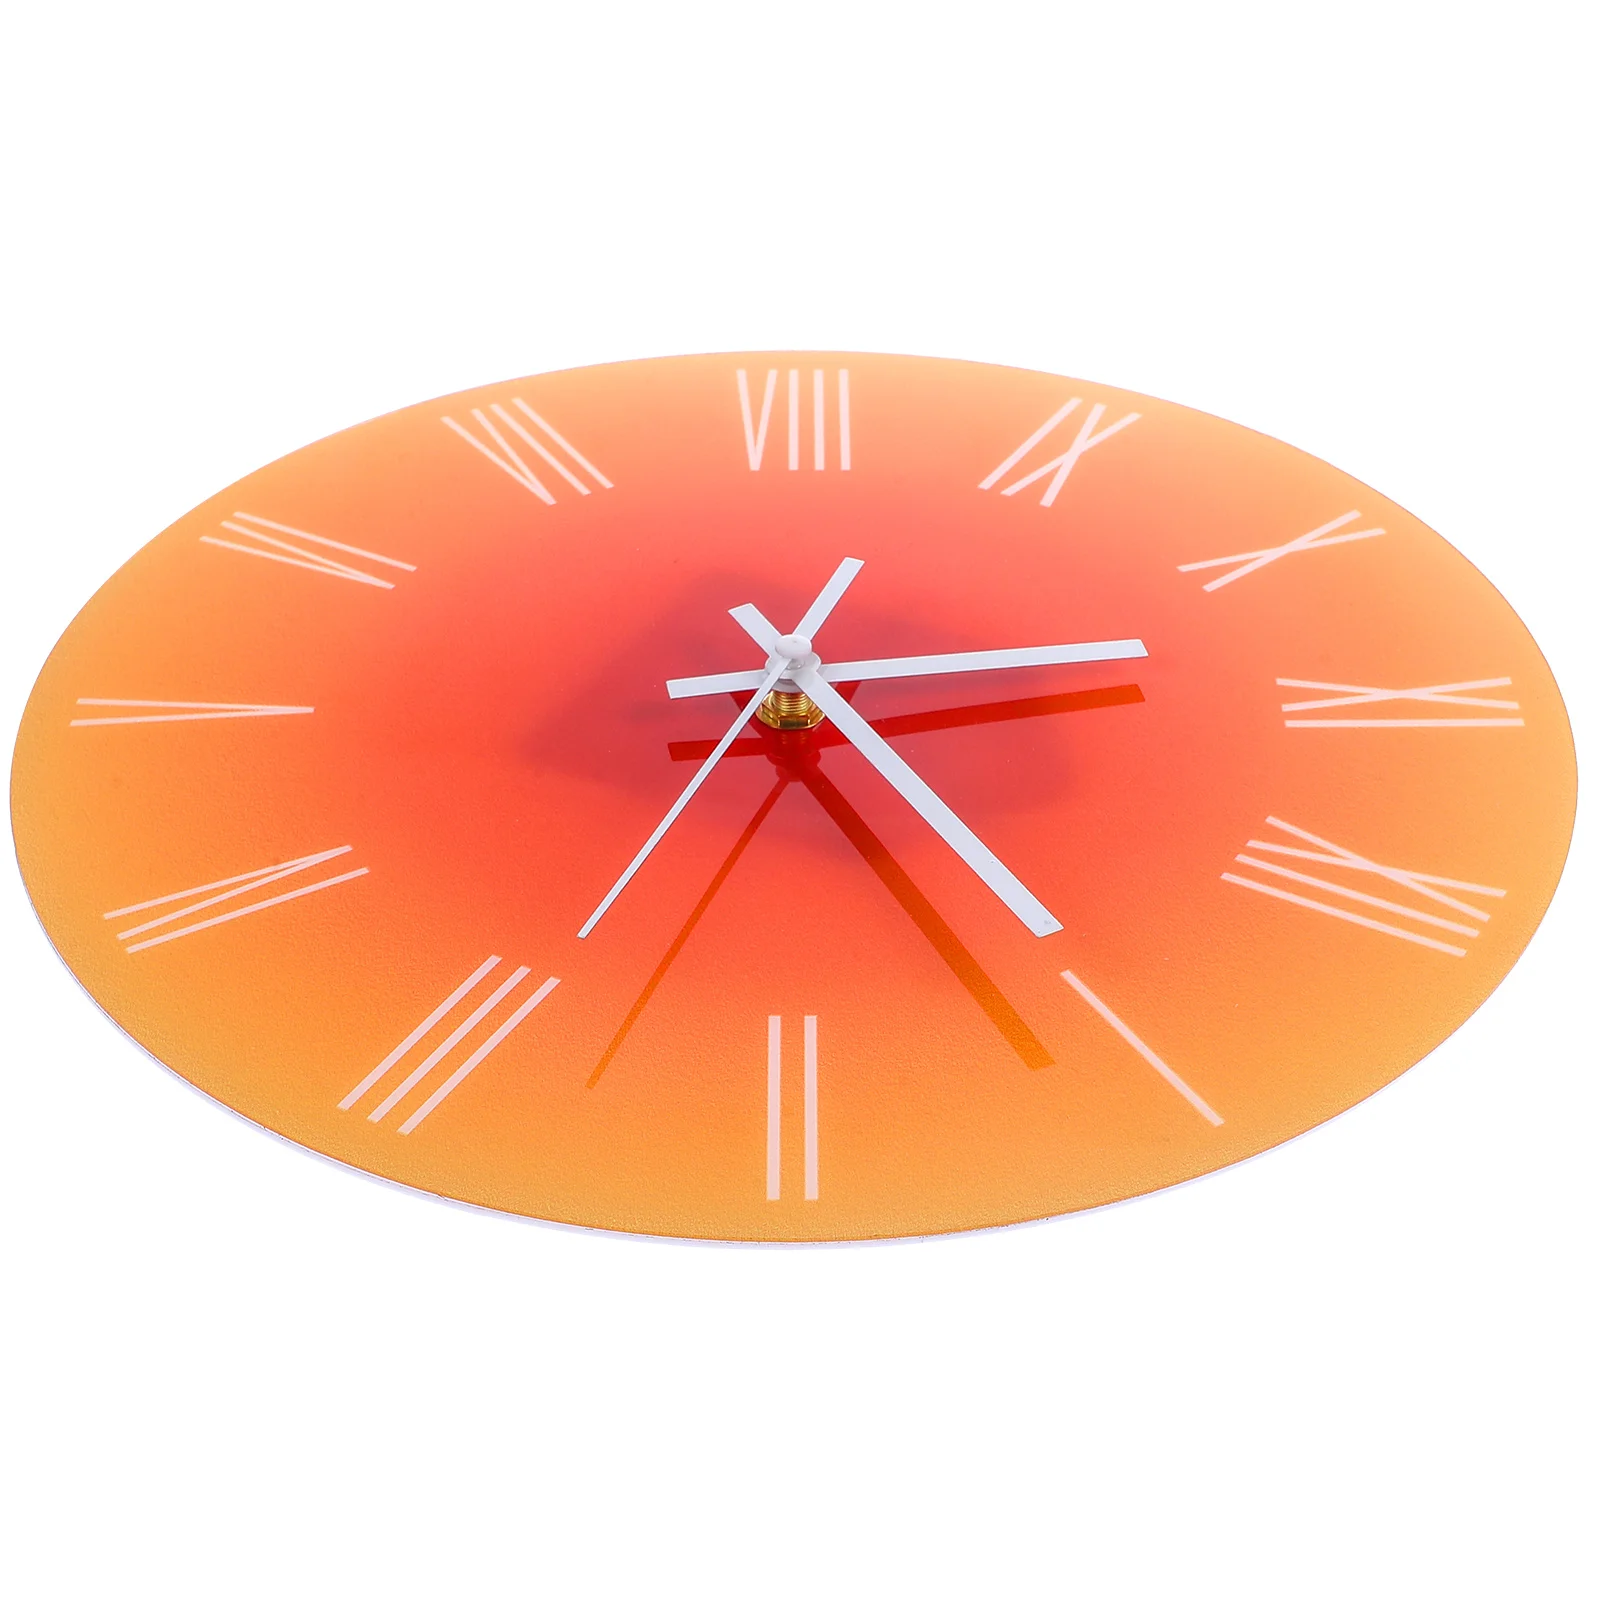 

Acrylic Wall Clock Unique Clocks Silent Non Ticking Decorate Bathroom Office Living Home